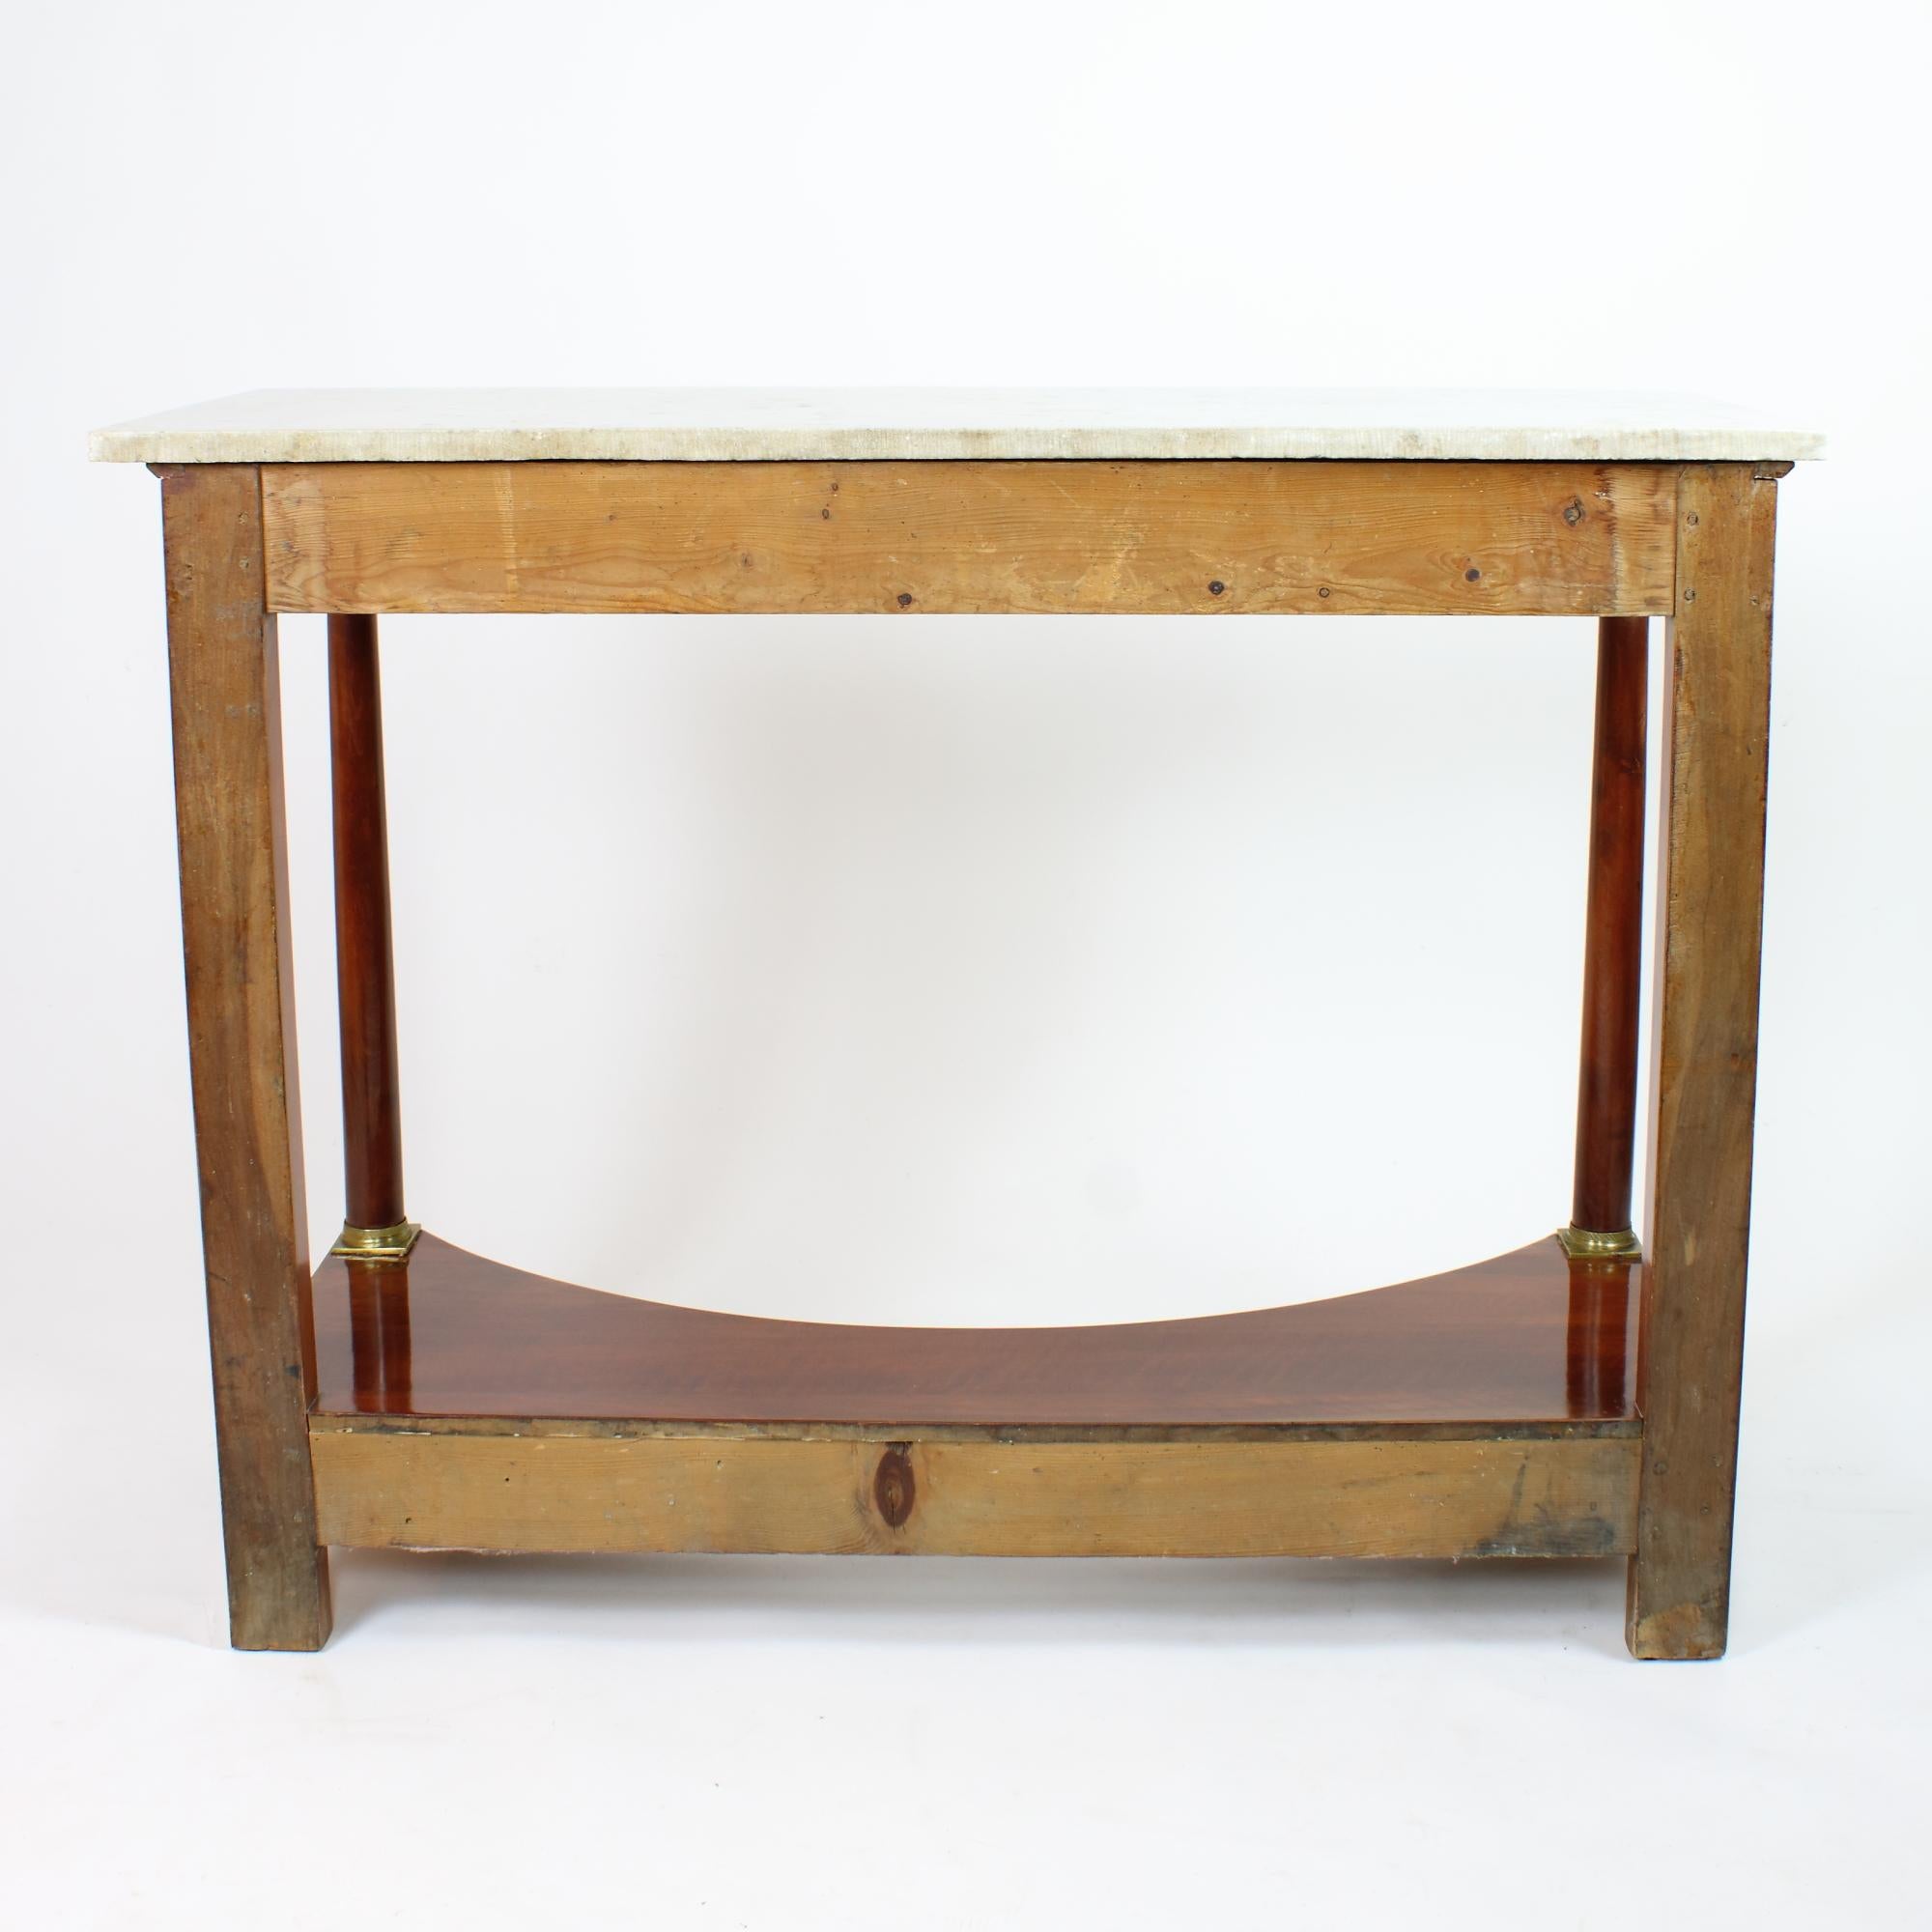 Early 19th Century French Empire Large Neoclassical Walnut Console Table For Sale 6